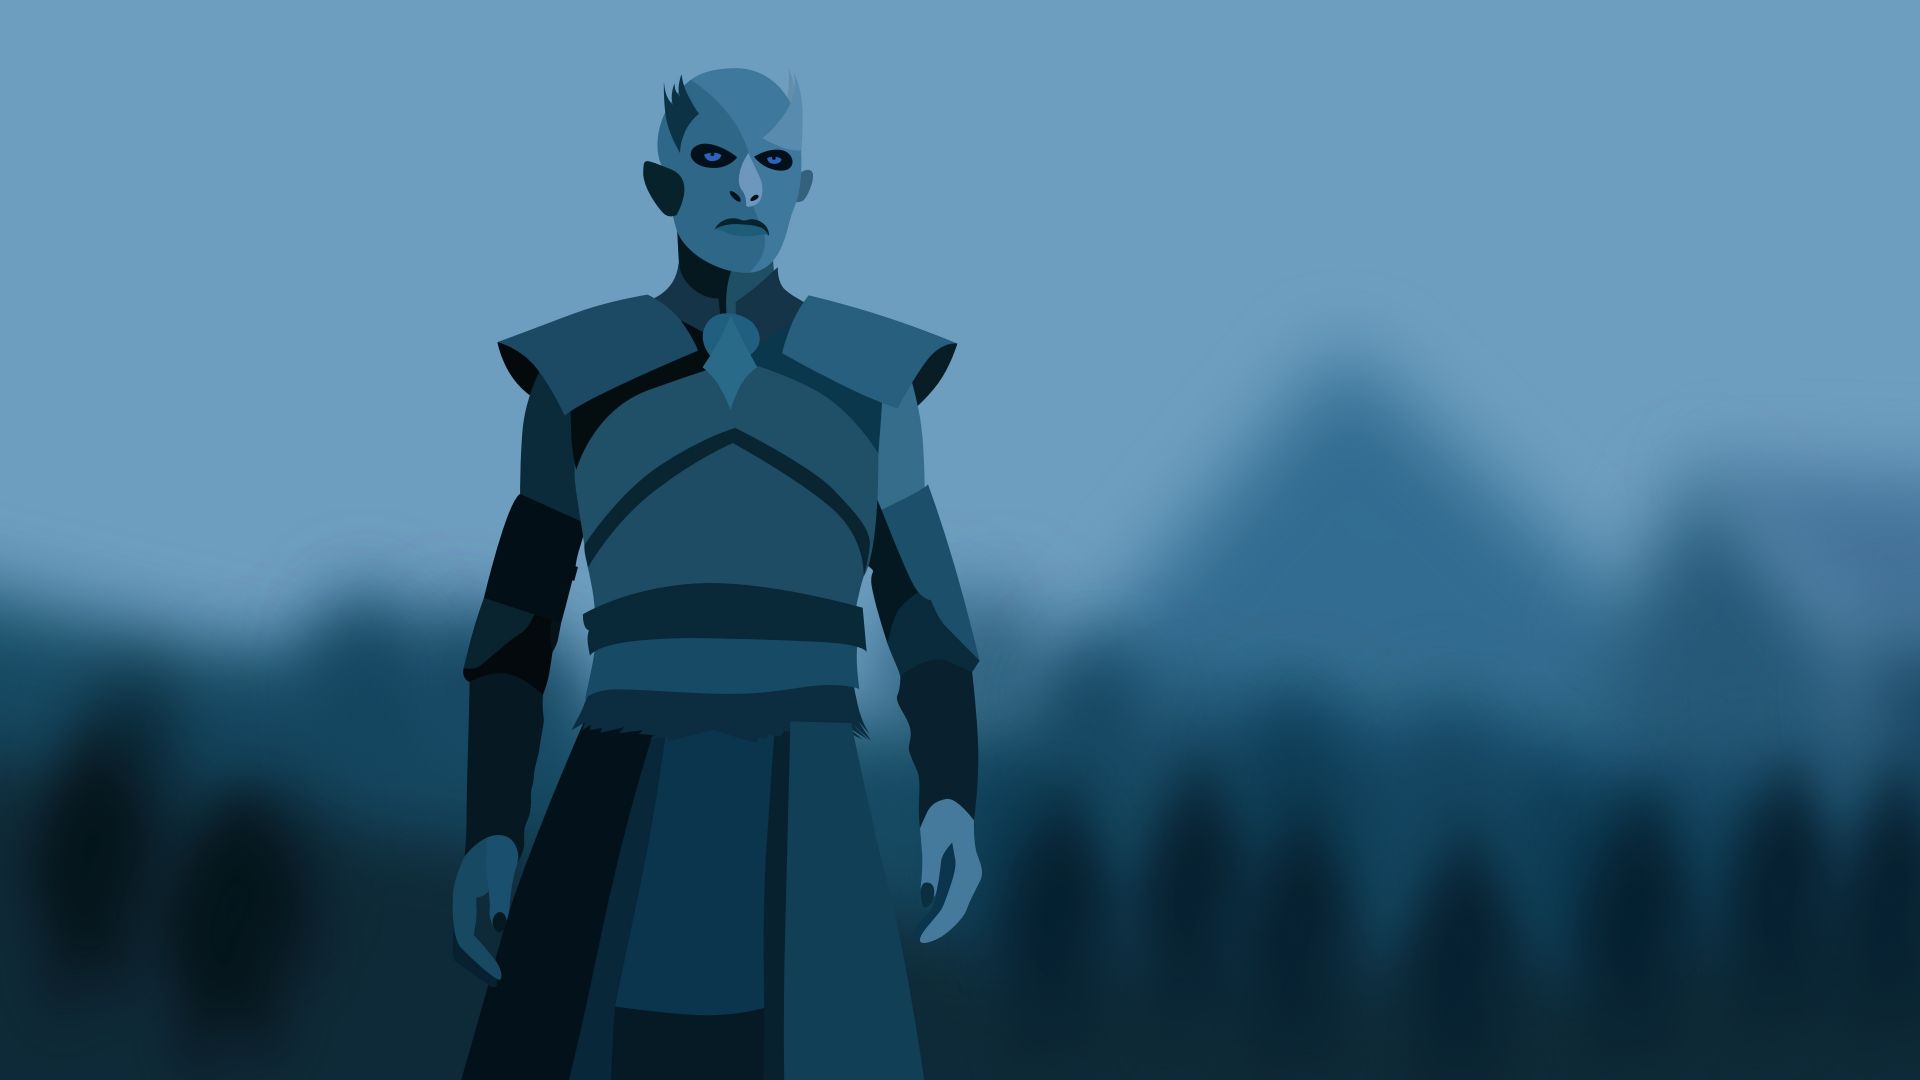 Desktop Wallpaper White Walkers, Game Of Thrones, Tv Series, Minimal, Art,  Hd Image, Picture, Background, 368a7d